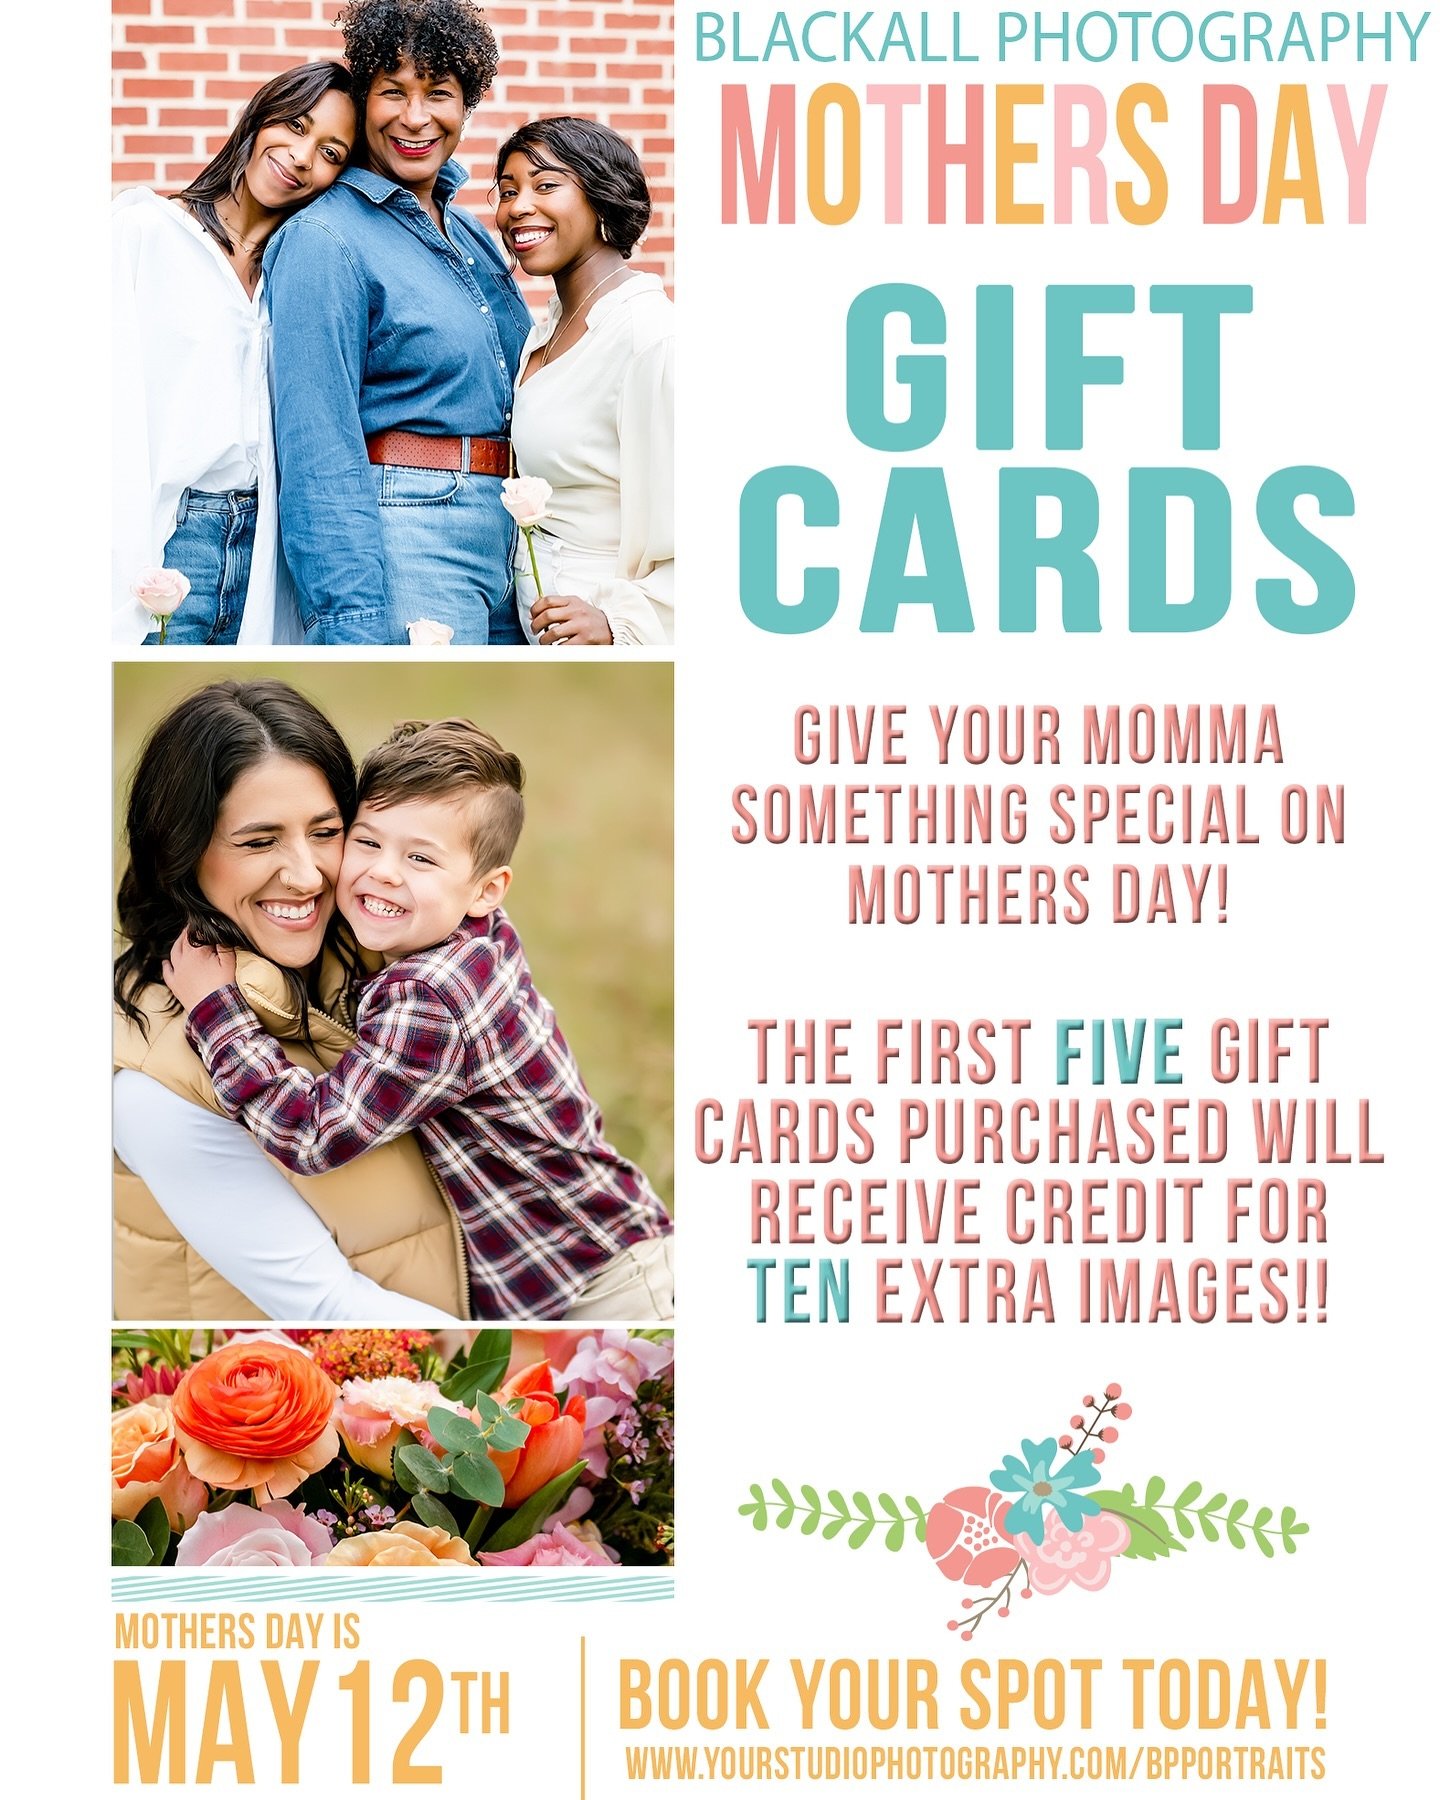 This is your friendly reminder that Mother&rsquo;s Day is in one month!!
&zwnj;
The first FIVE people who purchase a gift card for Mother&rsquo;s Day will receive a little something extra! ✨
&zwnj;
Click the portrait inquiry 🔗 to reserve yours
&zwnj